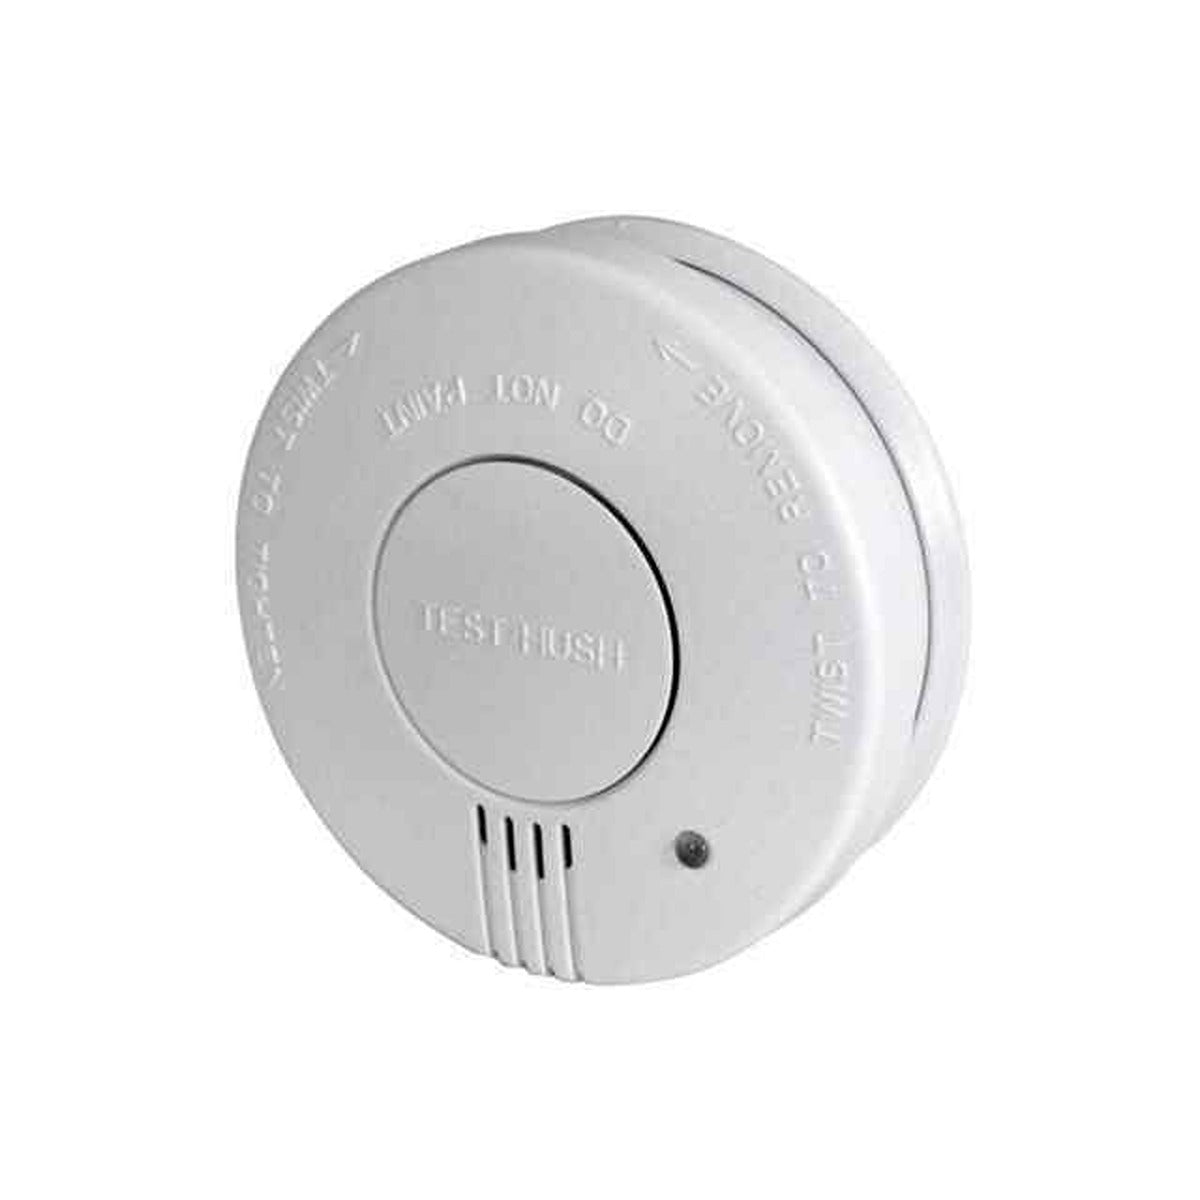 Mercury - Photoelectric Smoke Detector - Continental Food Store